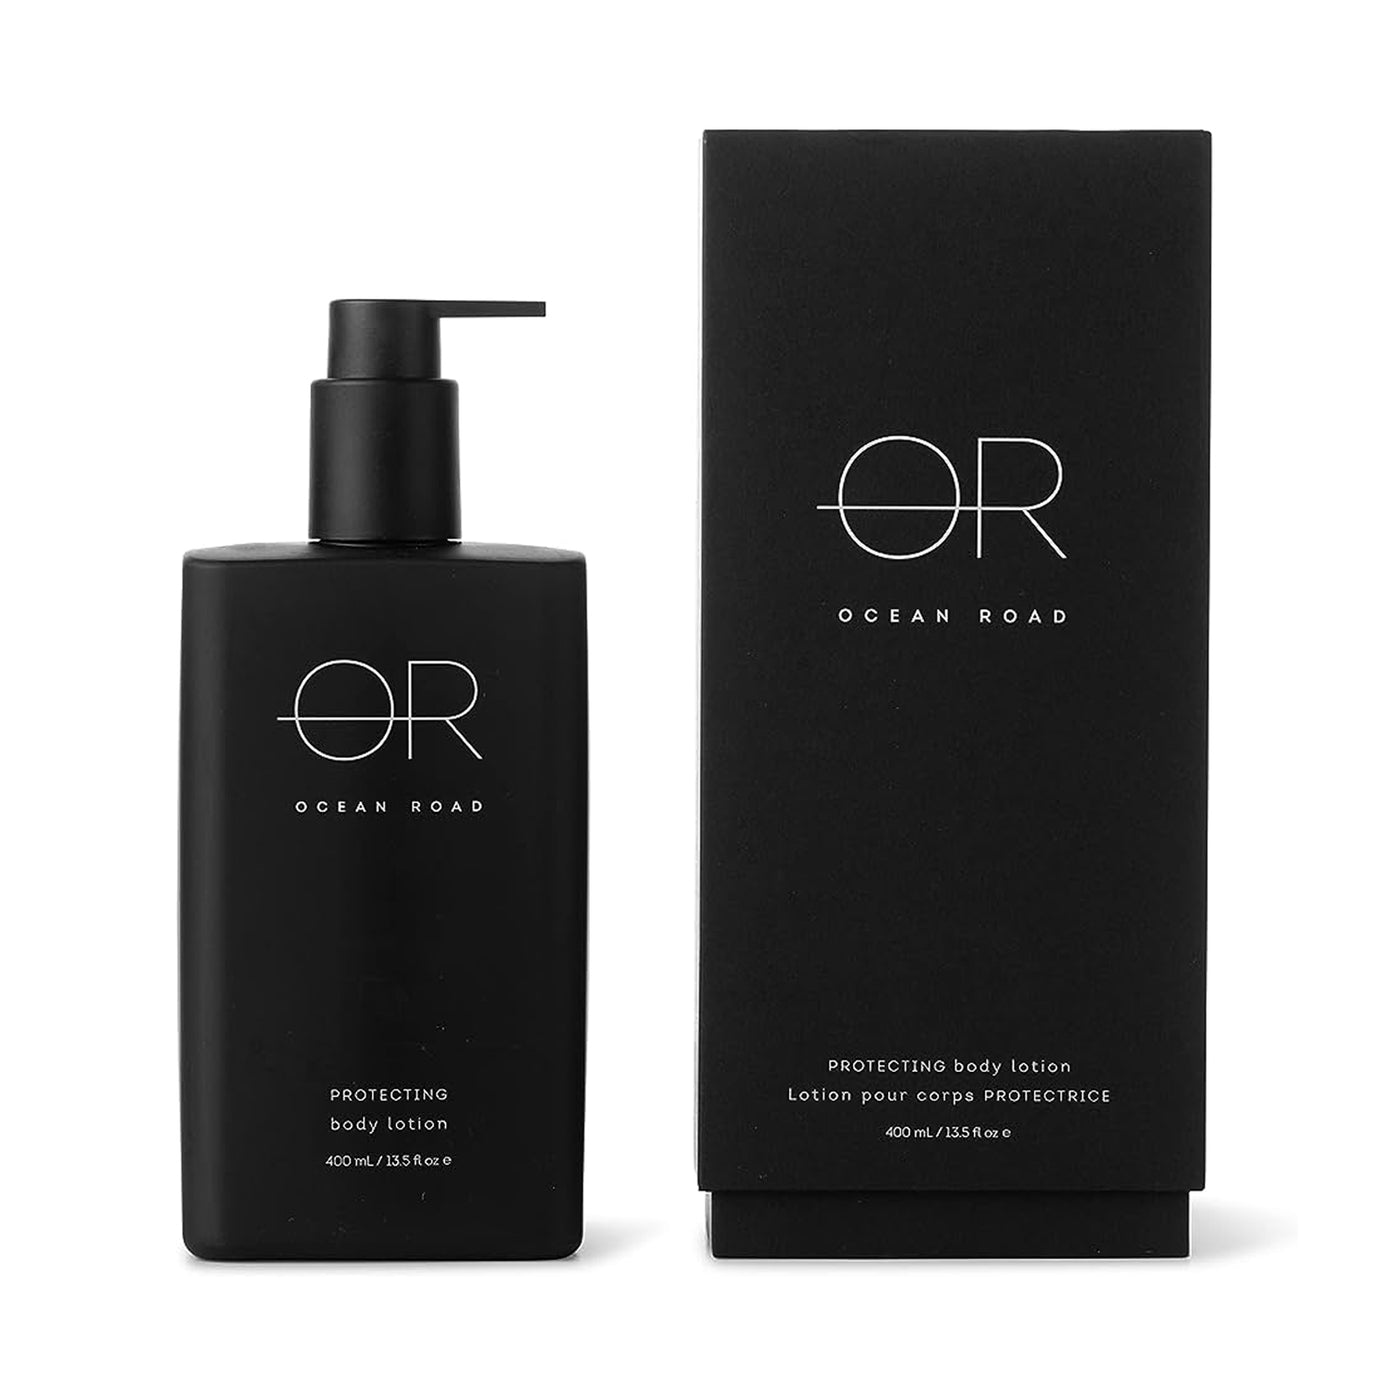 Ocean Road Black Protecting Body Lotion 400ml with packaging